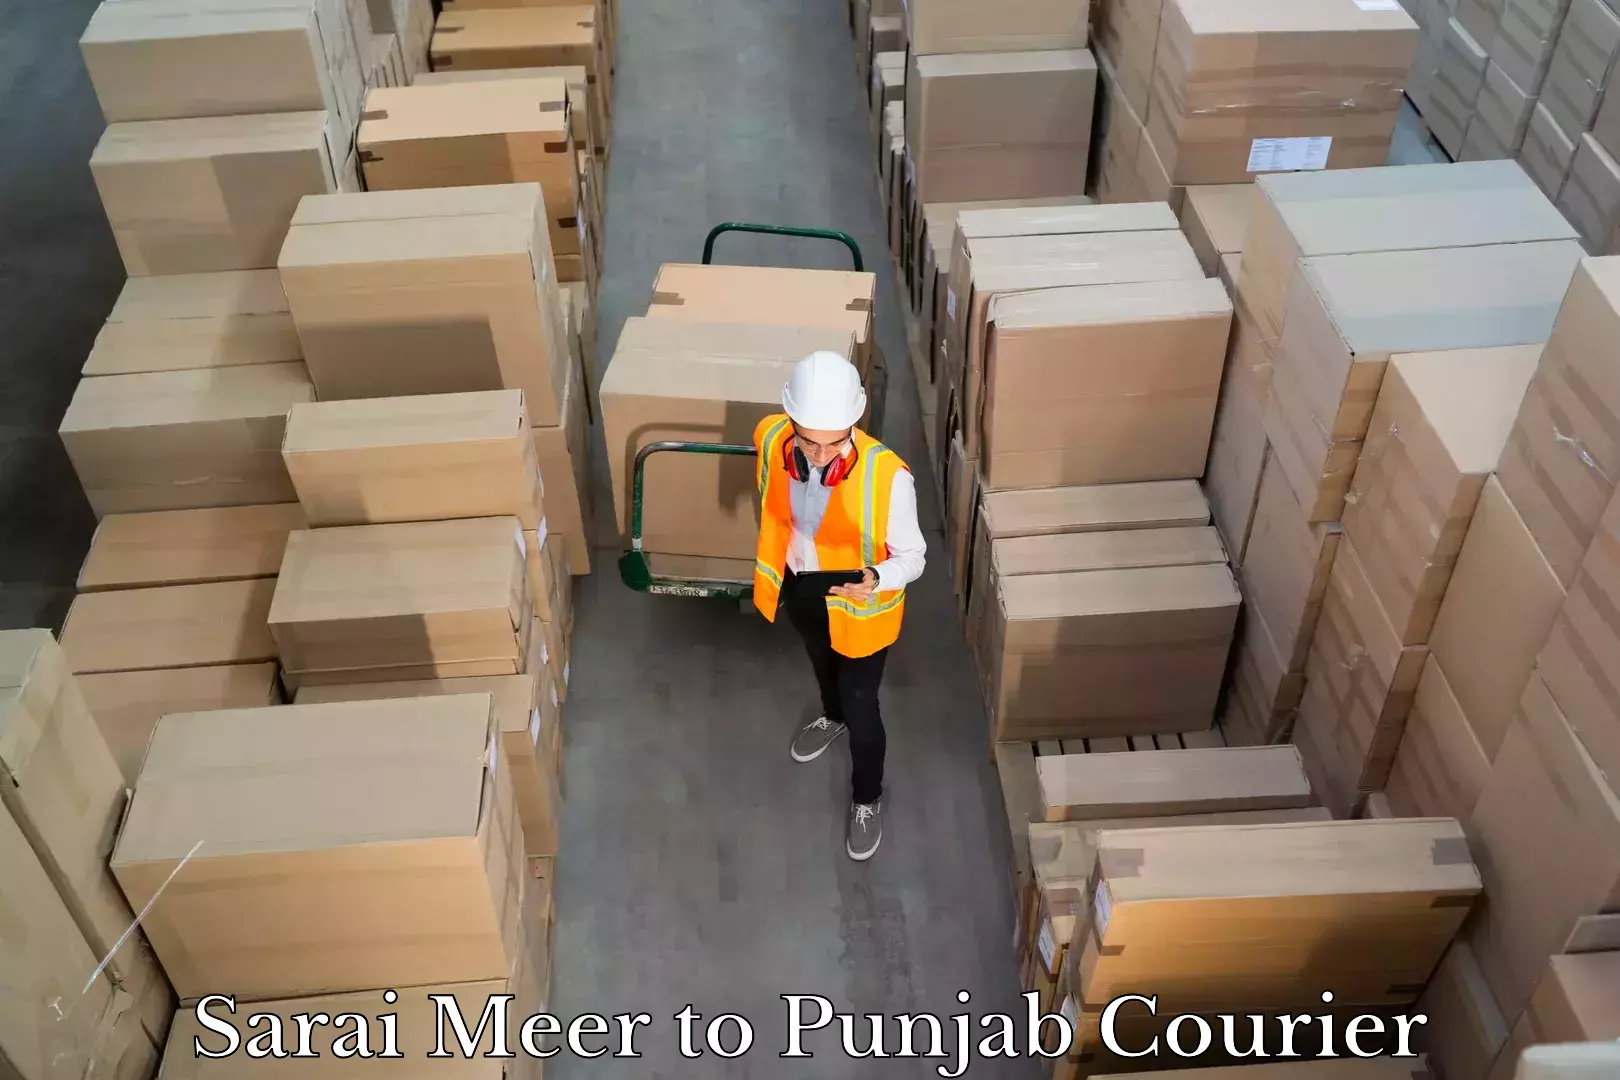 Luggage delivery providers Sarai Meer to Punjab